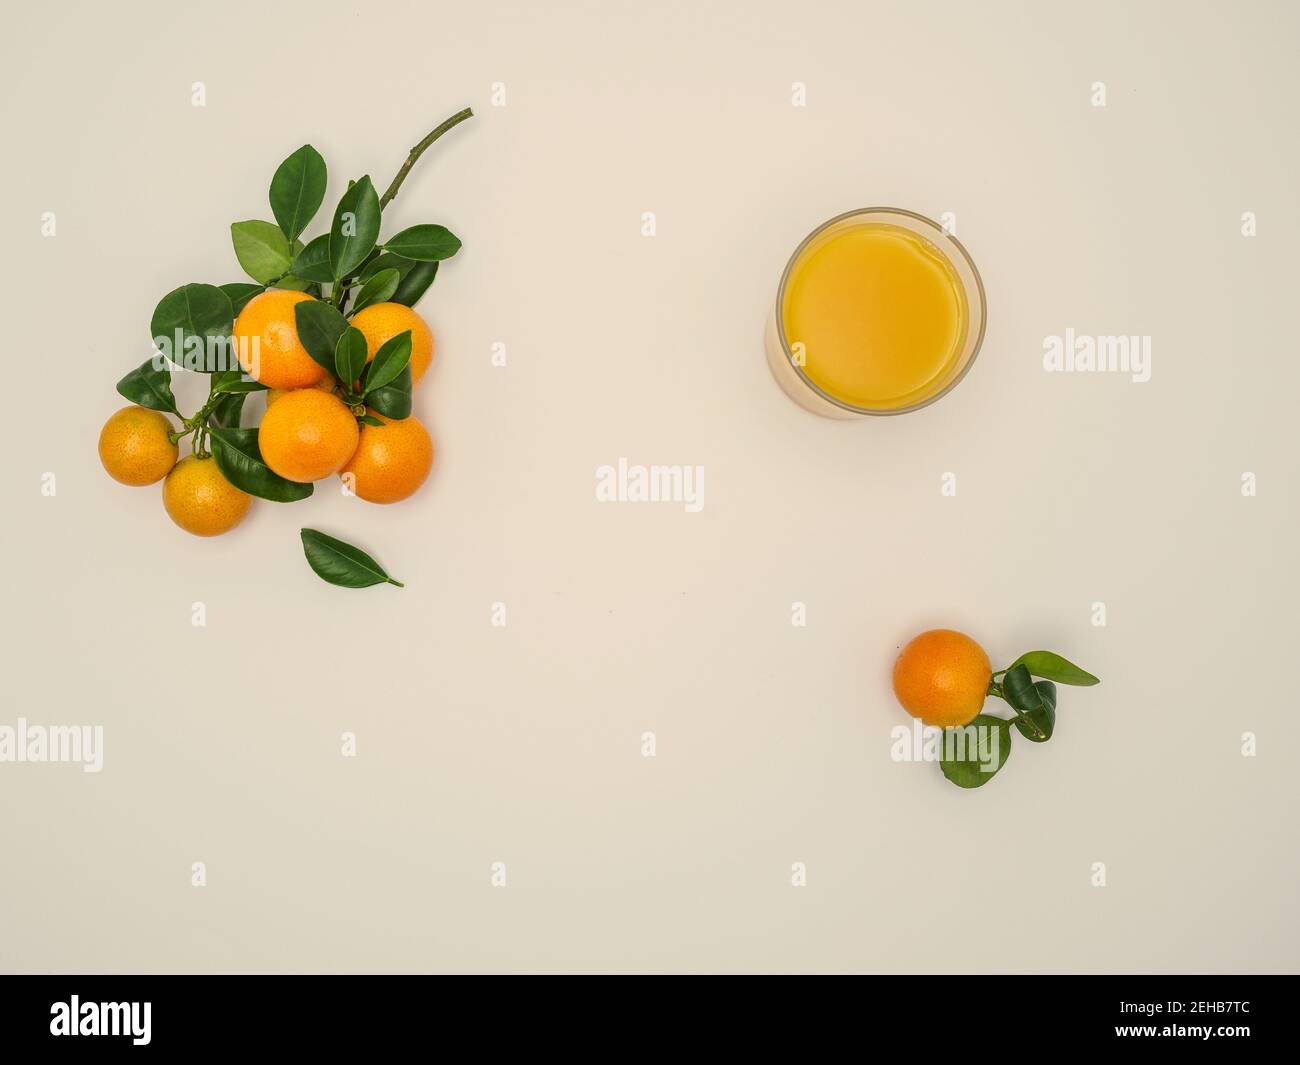 https://c8.alamy.com/comp/2EHB7TC/fresh-clementines-citrus-clementina-with-green-leaves-and-fresh-juice-on-beige-background-hybrid-of-small-sized-tangerines-overhead-copy-space-2EHB7TC.jpg